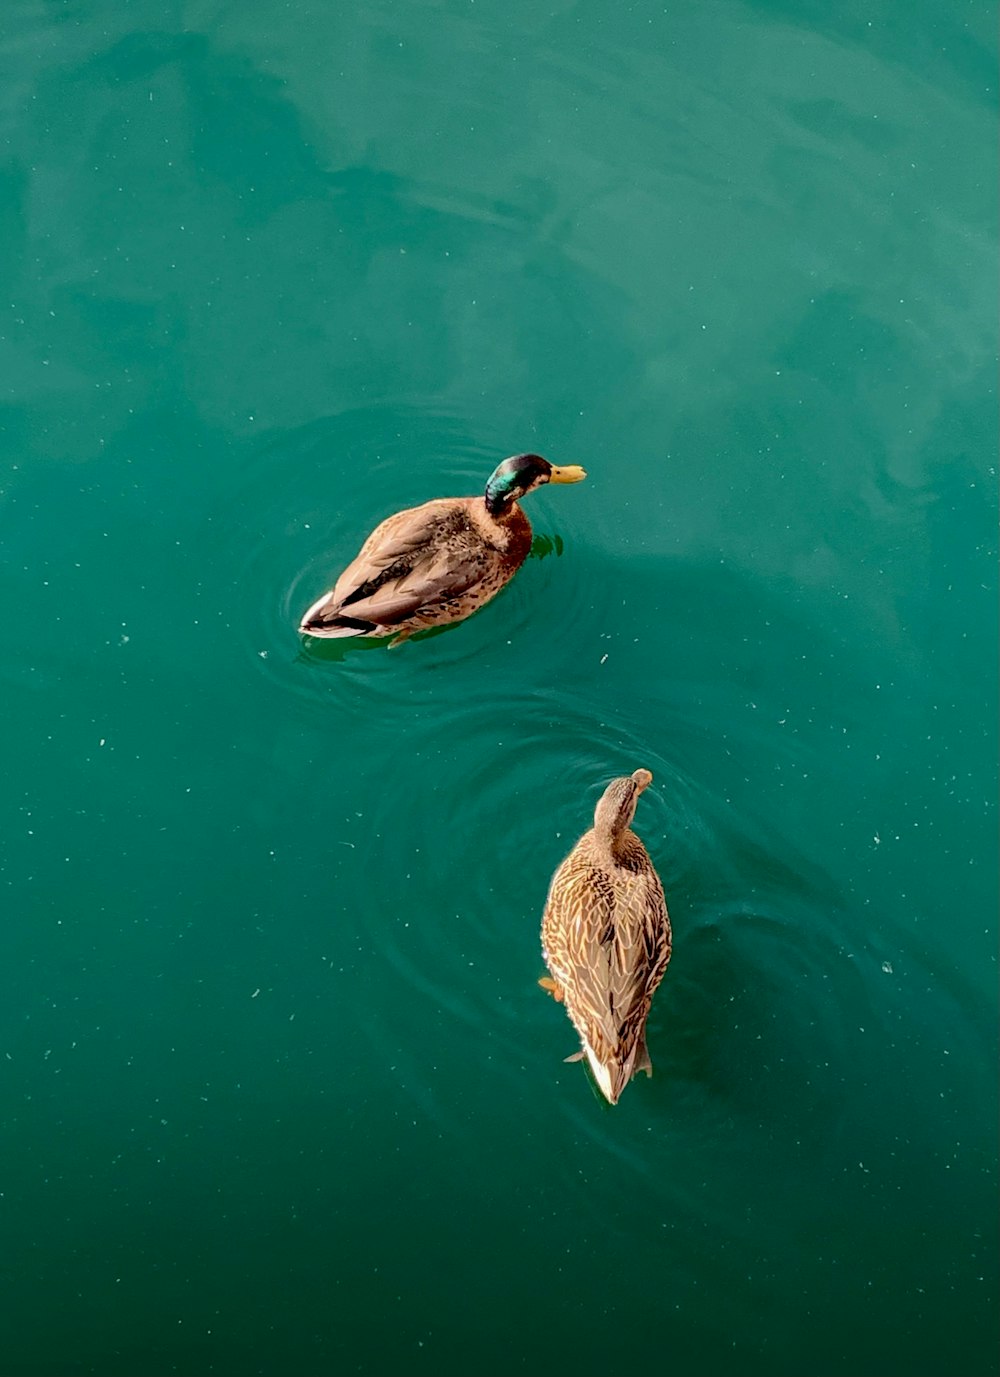 a couple of ducks swimming in a body of water